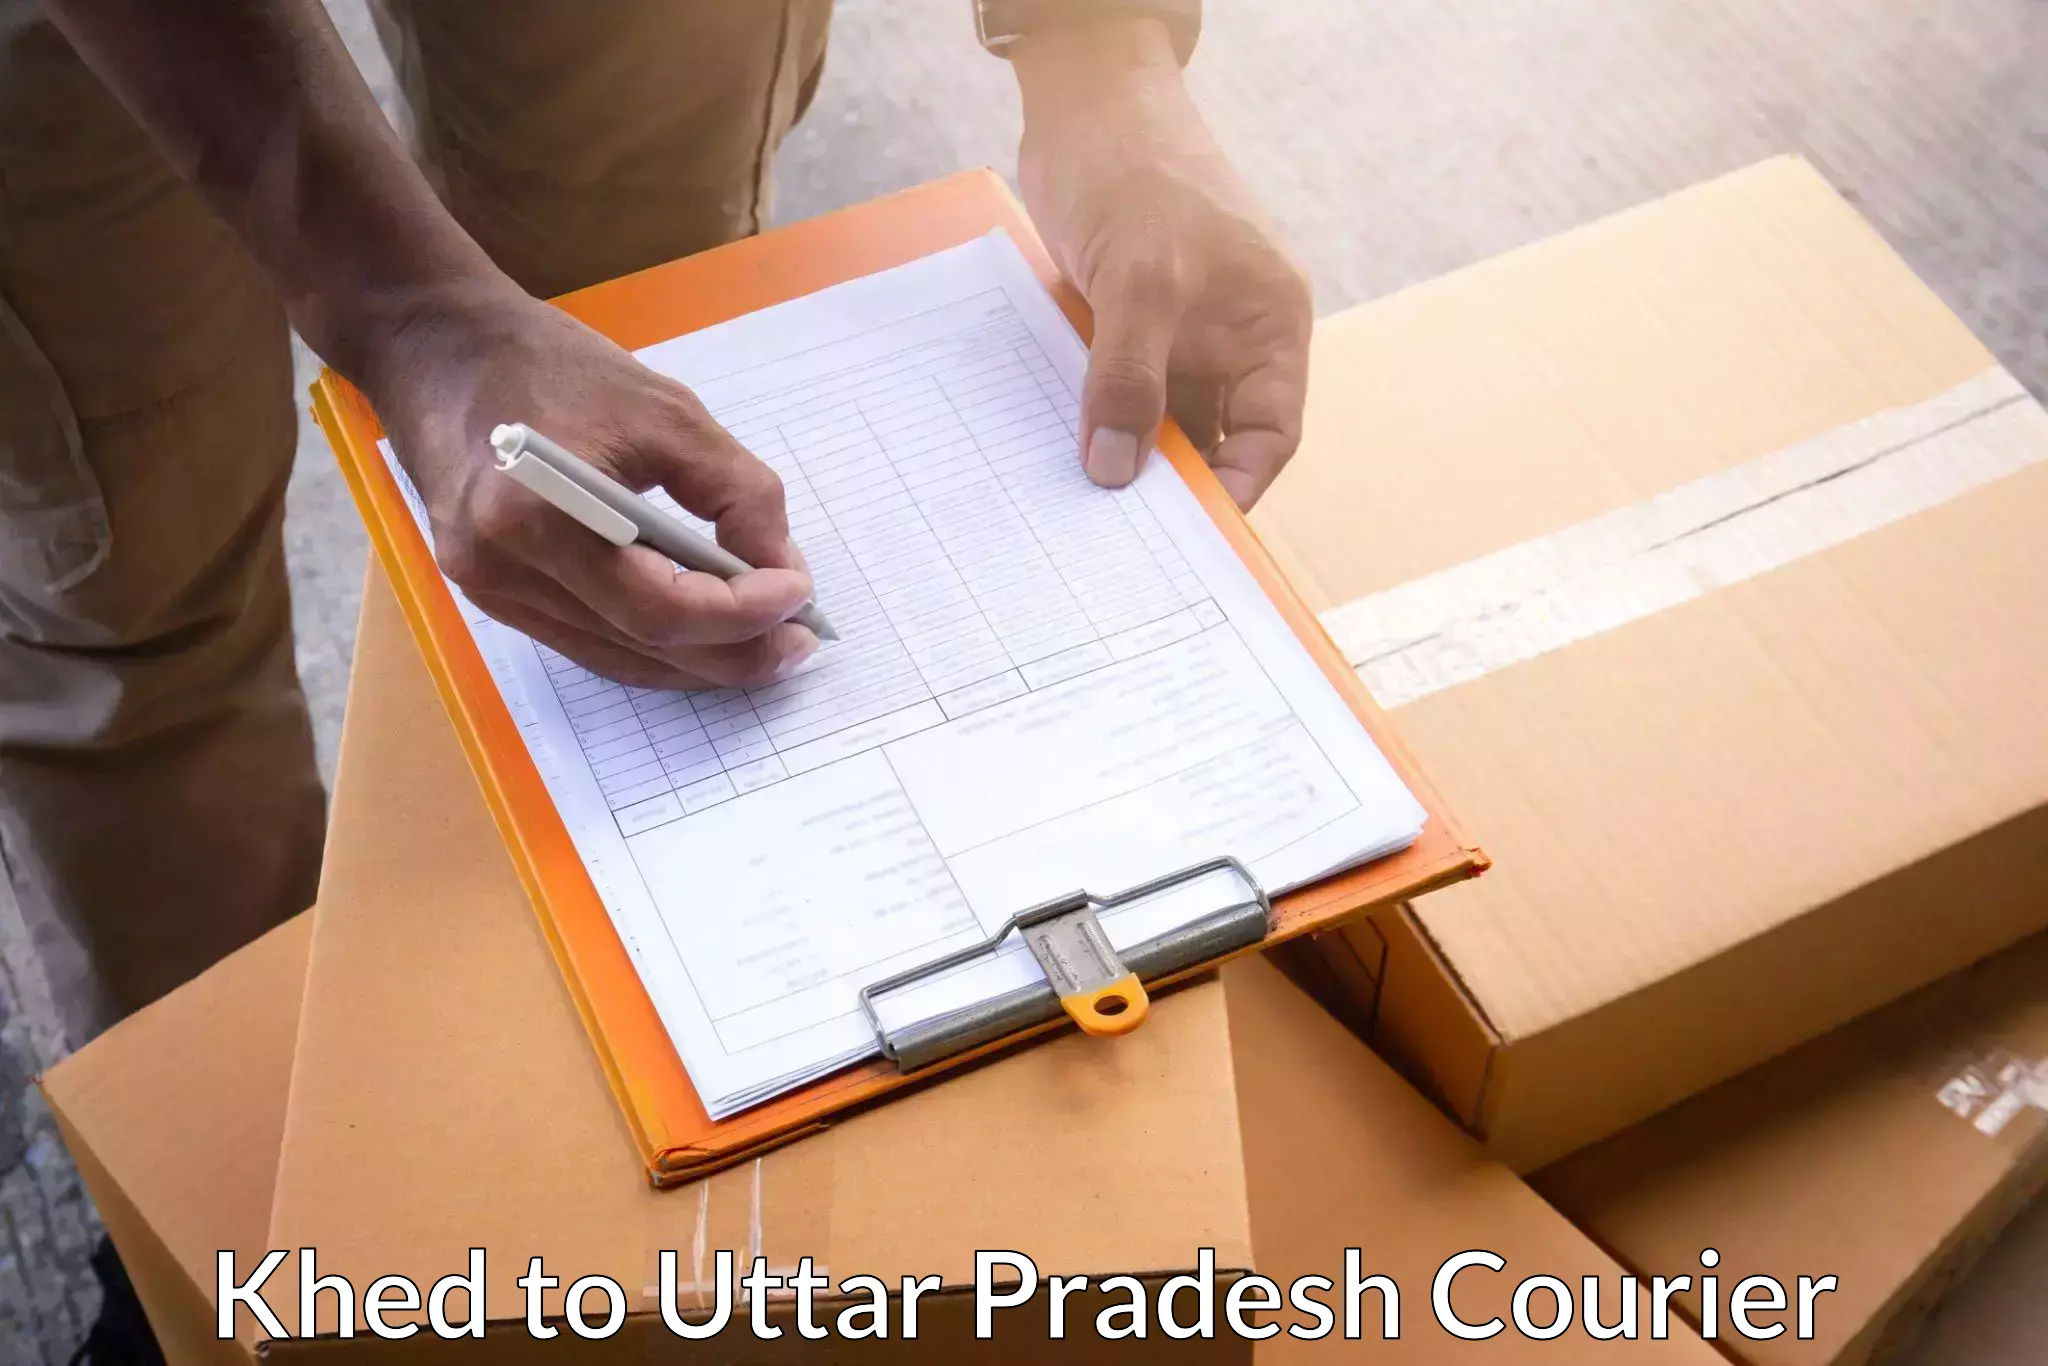 Enhanced tracking features Khed to Uttar Pradesh